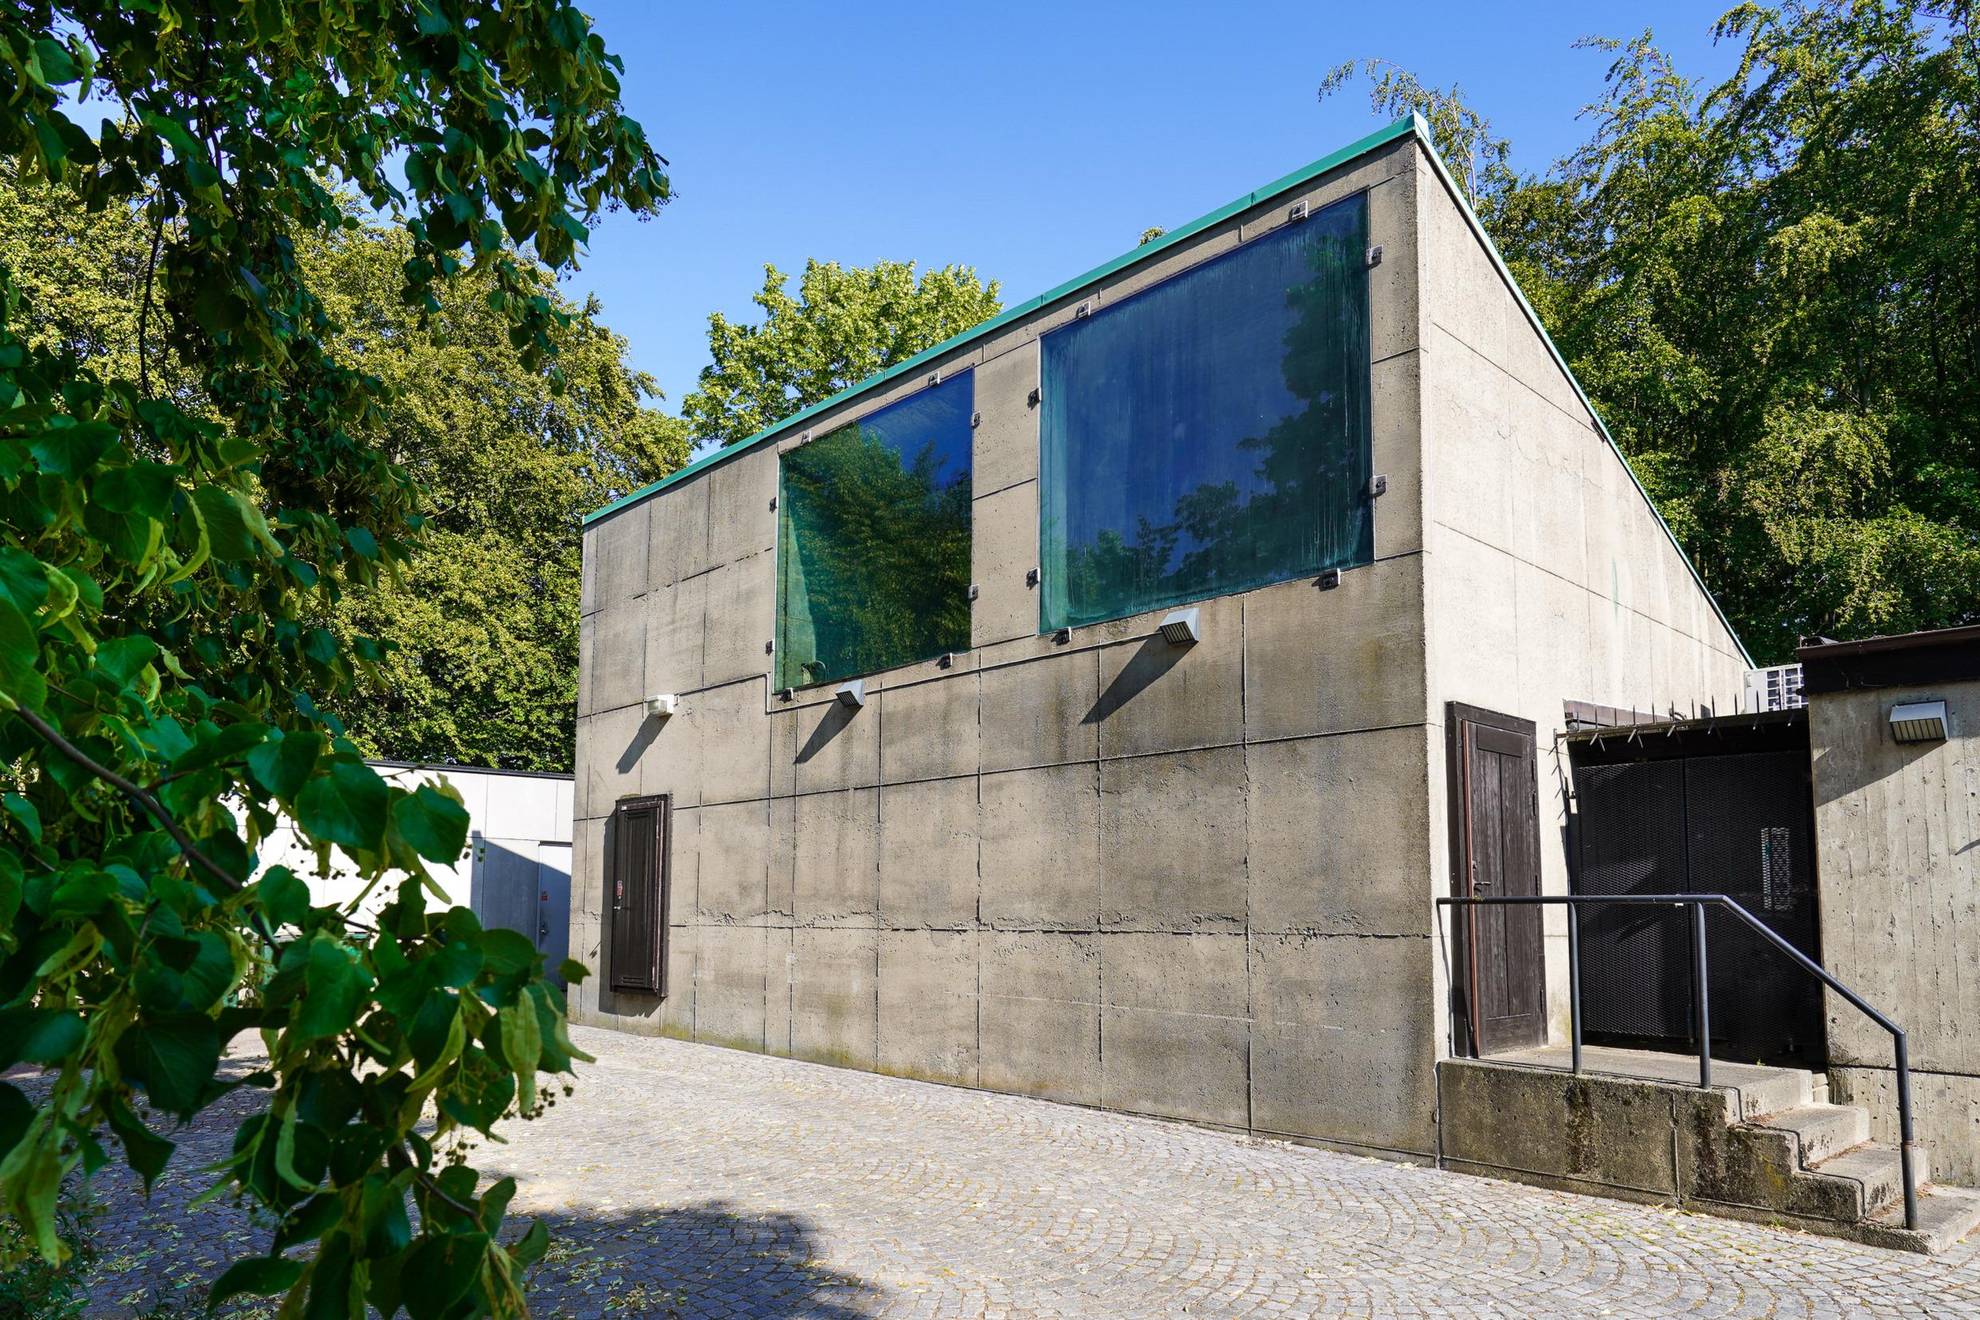 The house called 'The flower kiosk' is a simple concrete house where the windows are attached with black sealant. It is surrounded by greenery.